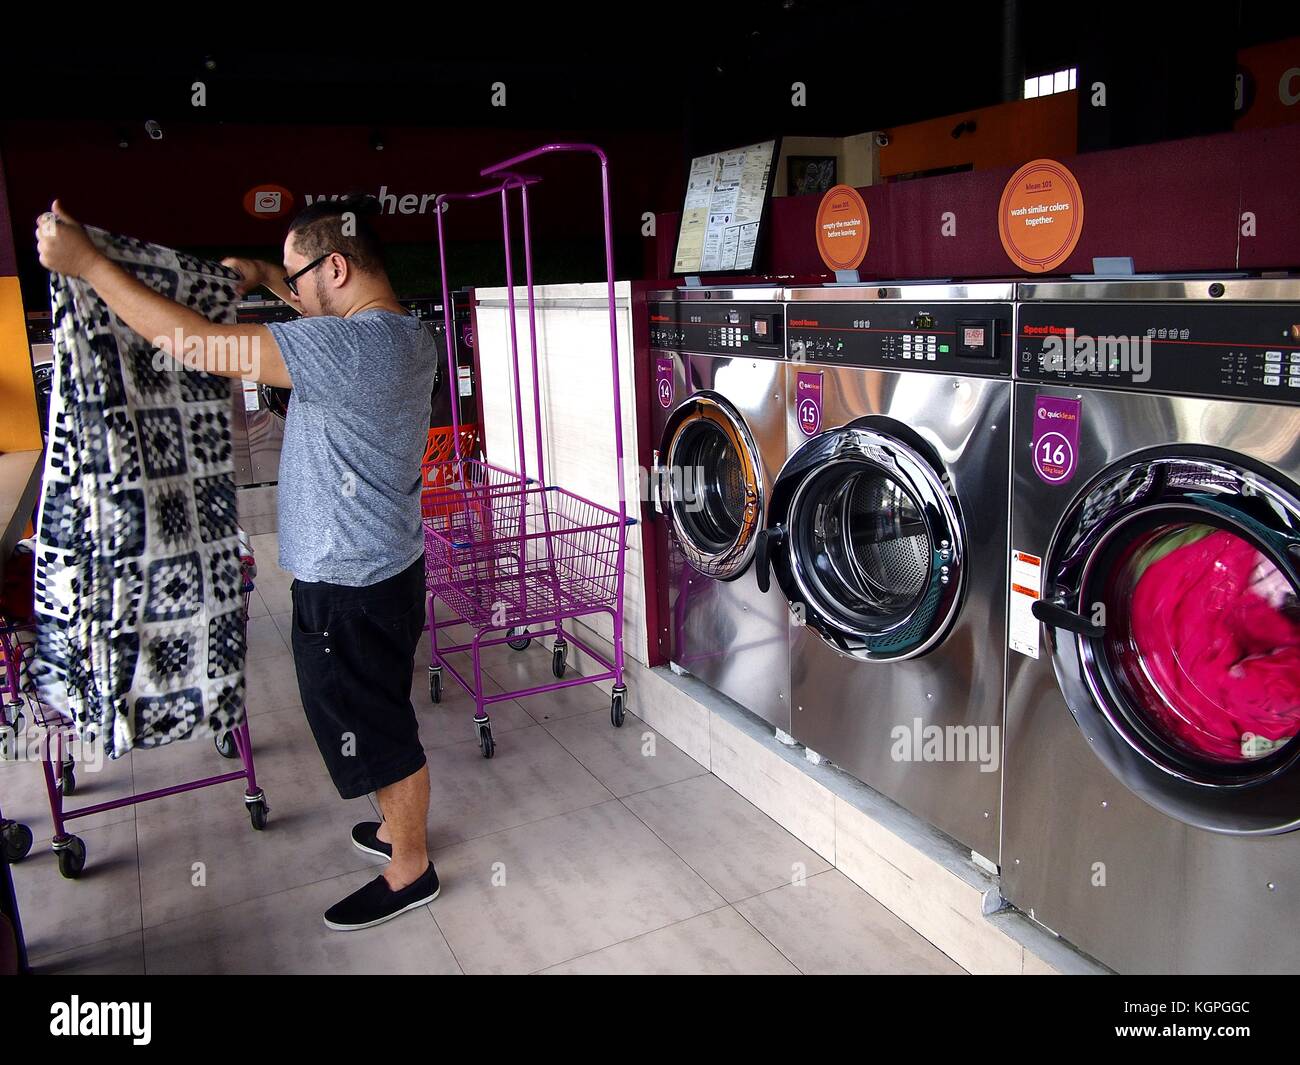 ANTIPOLO CITY, PHILIPPINES - NOVEMBER 7, 2017: A customer inside a newly established laundromat in the city of Antipolo in the Philippines. Stock Photo